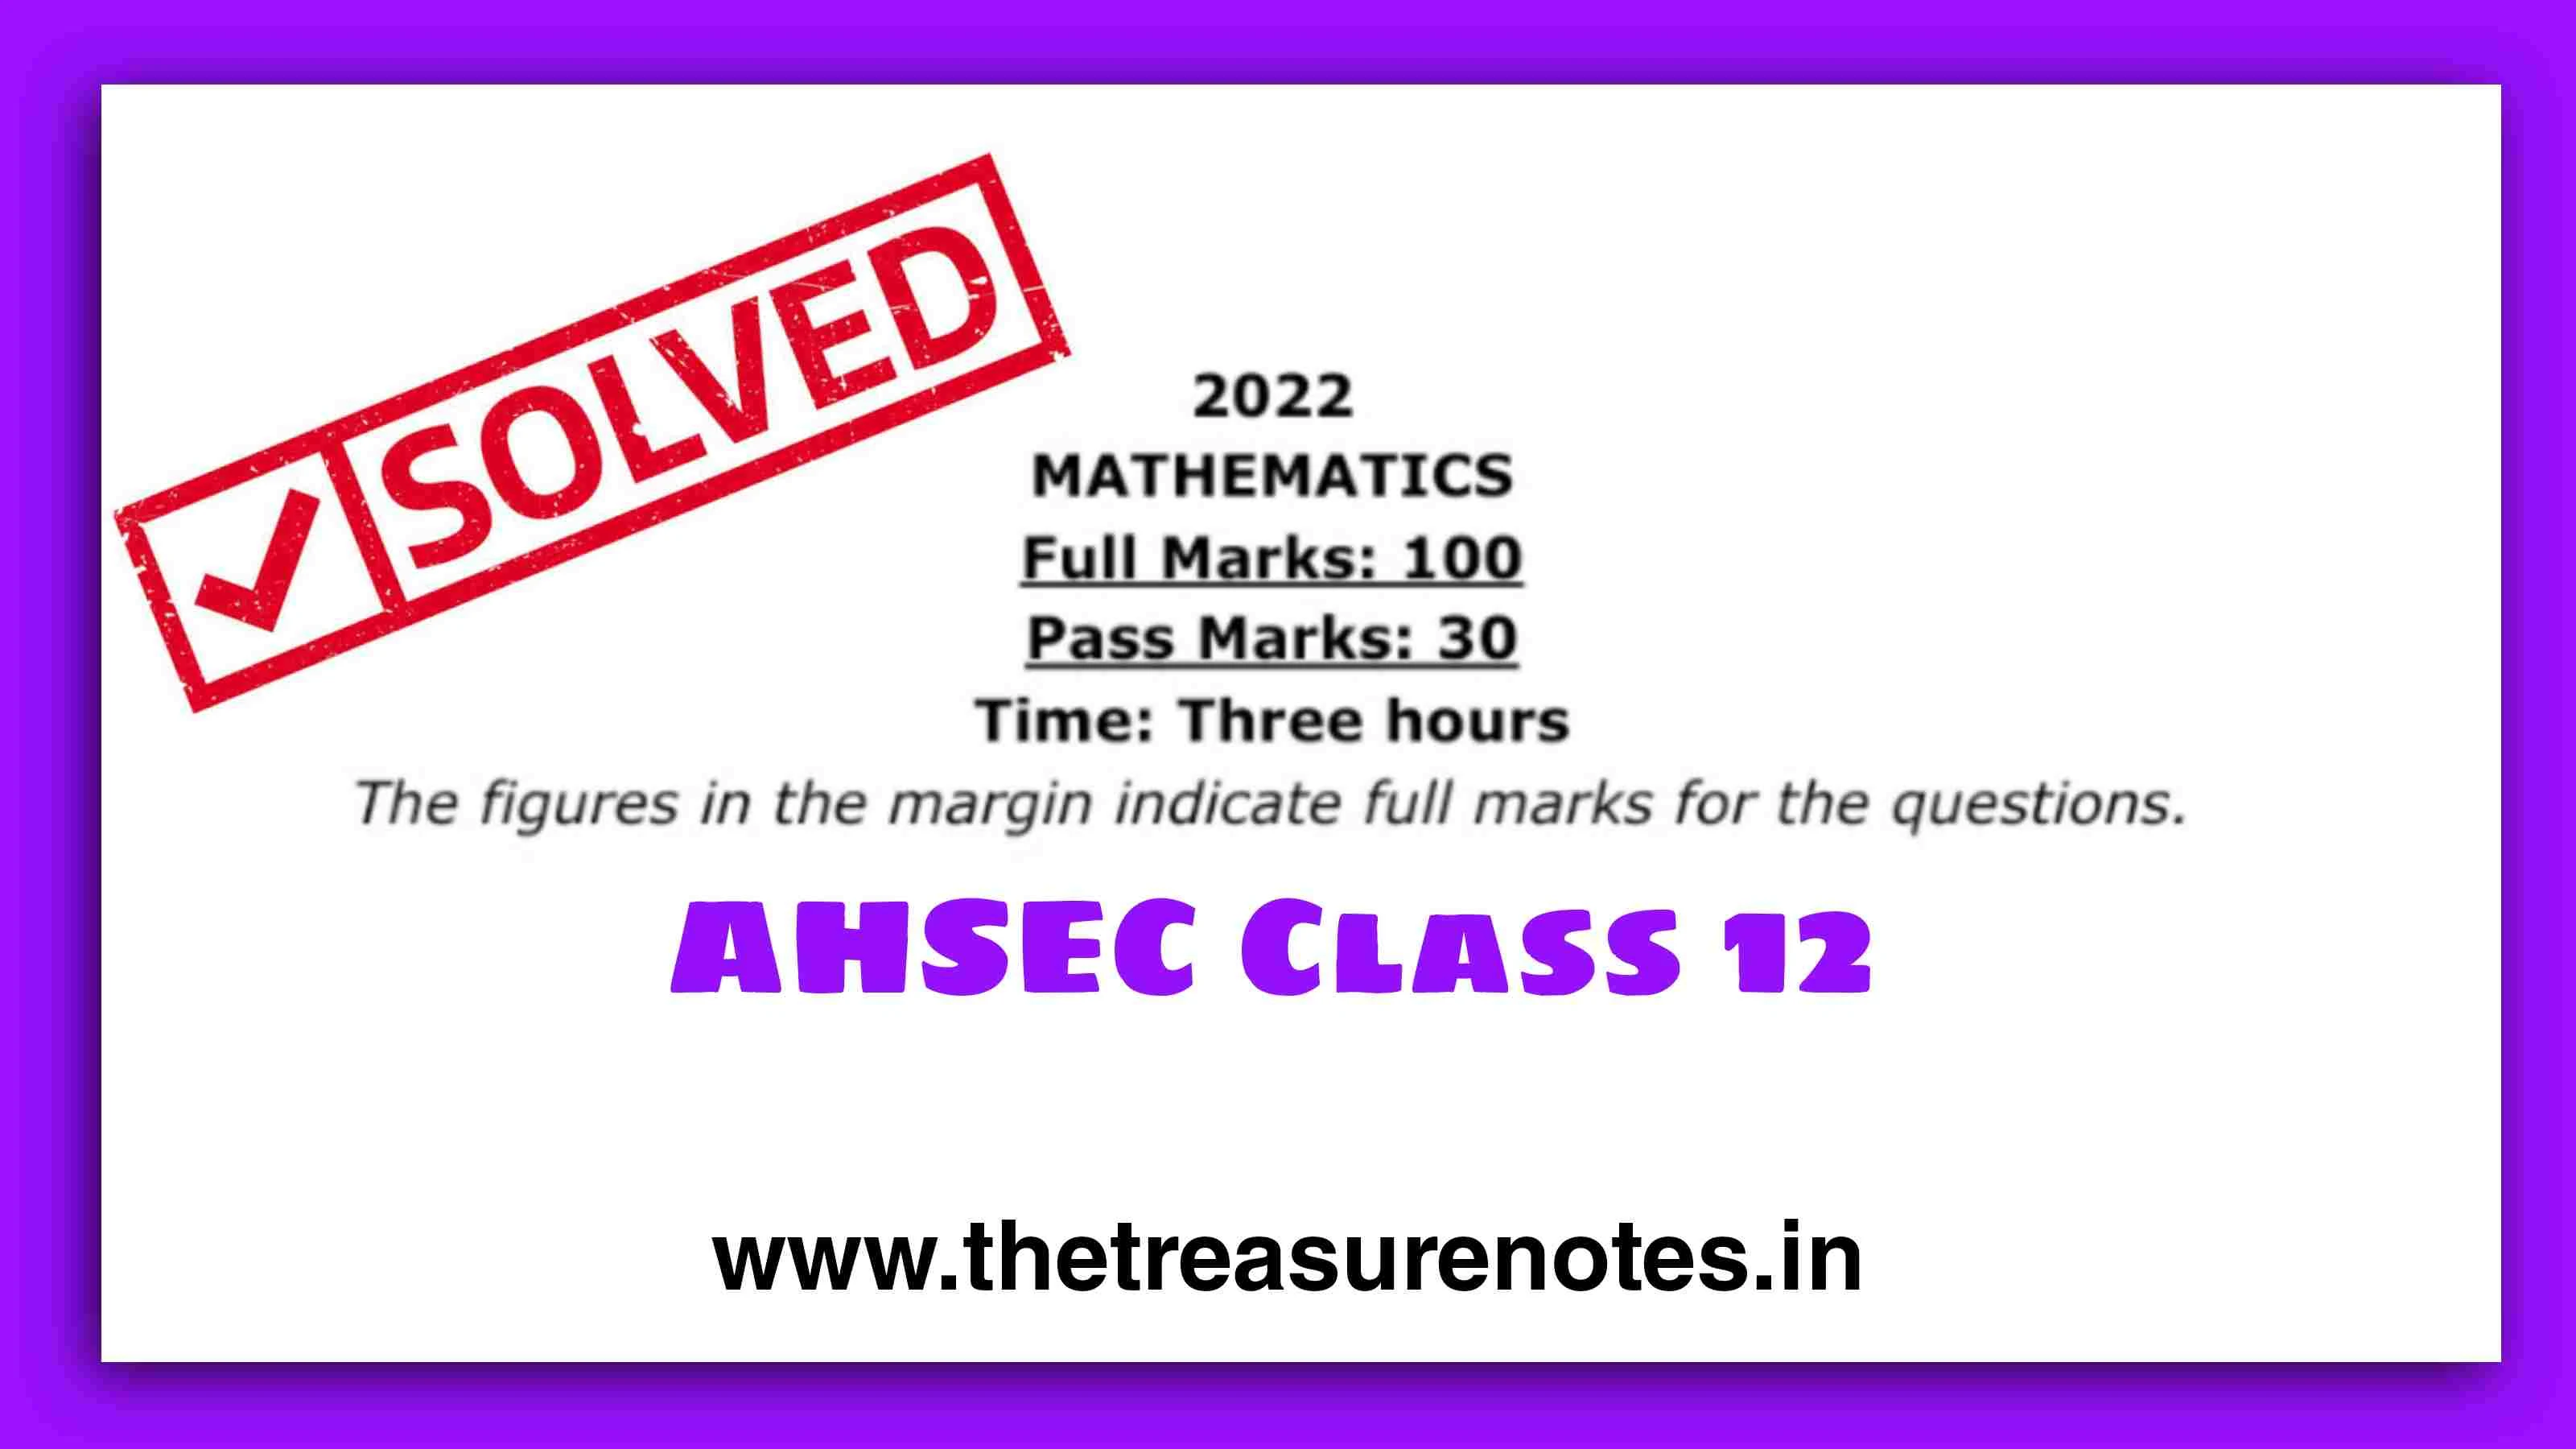 AHSEC Class 12 Mathematics Solved Question paper 2022 | HS 2nd Year Mathematics Solved Papers 2022